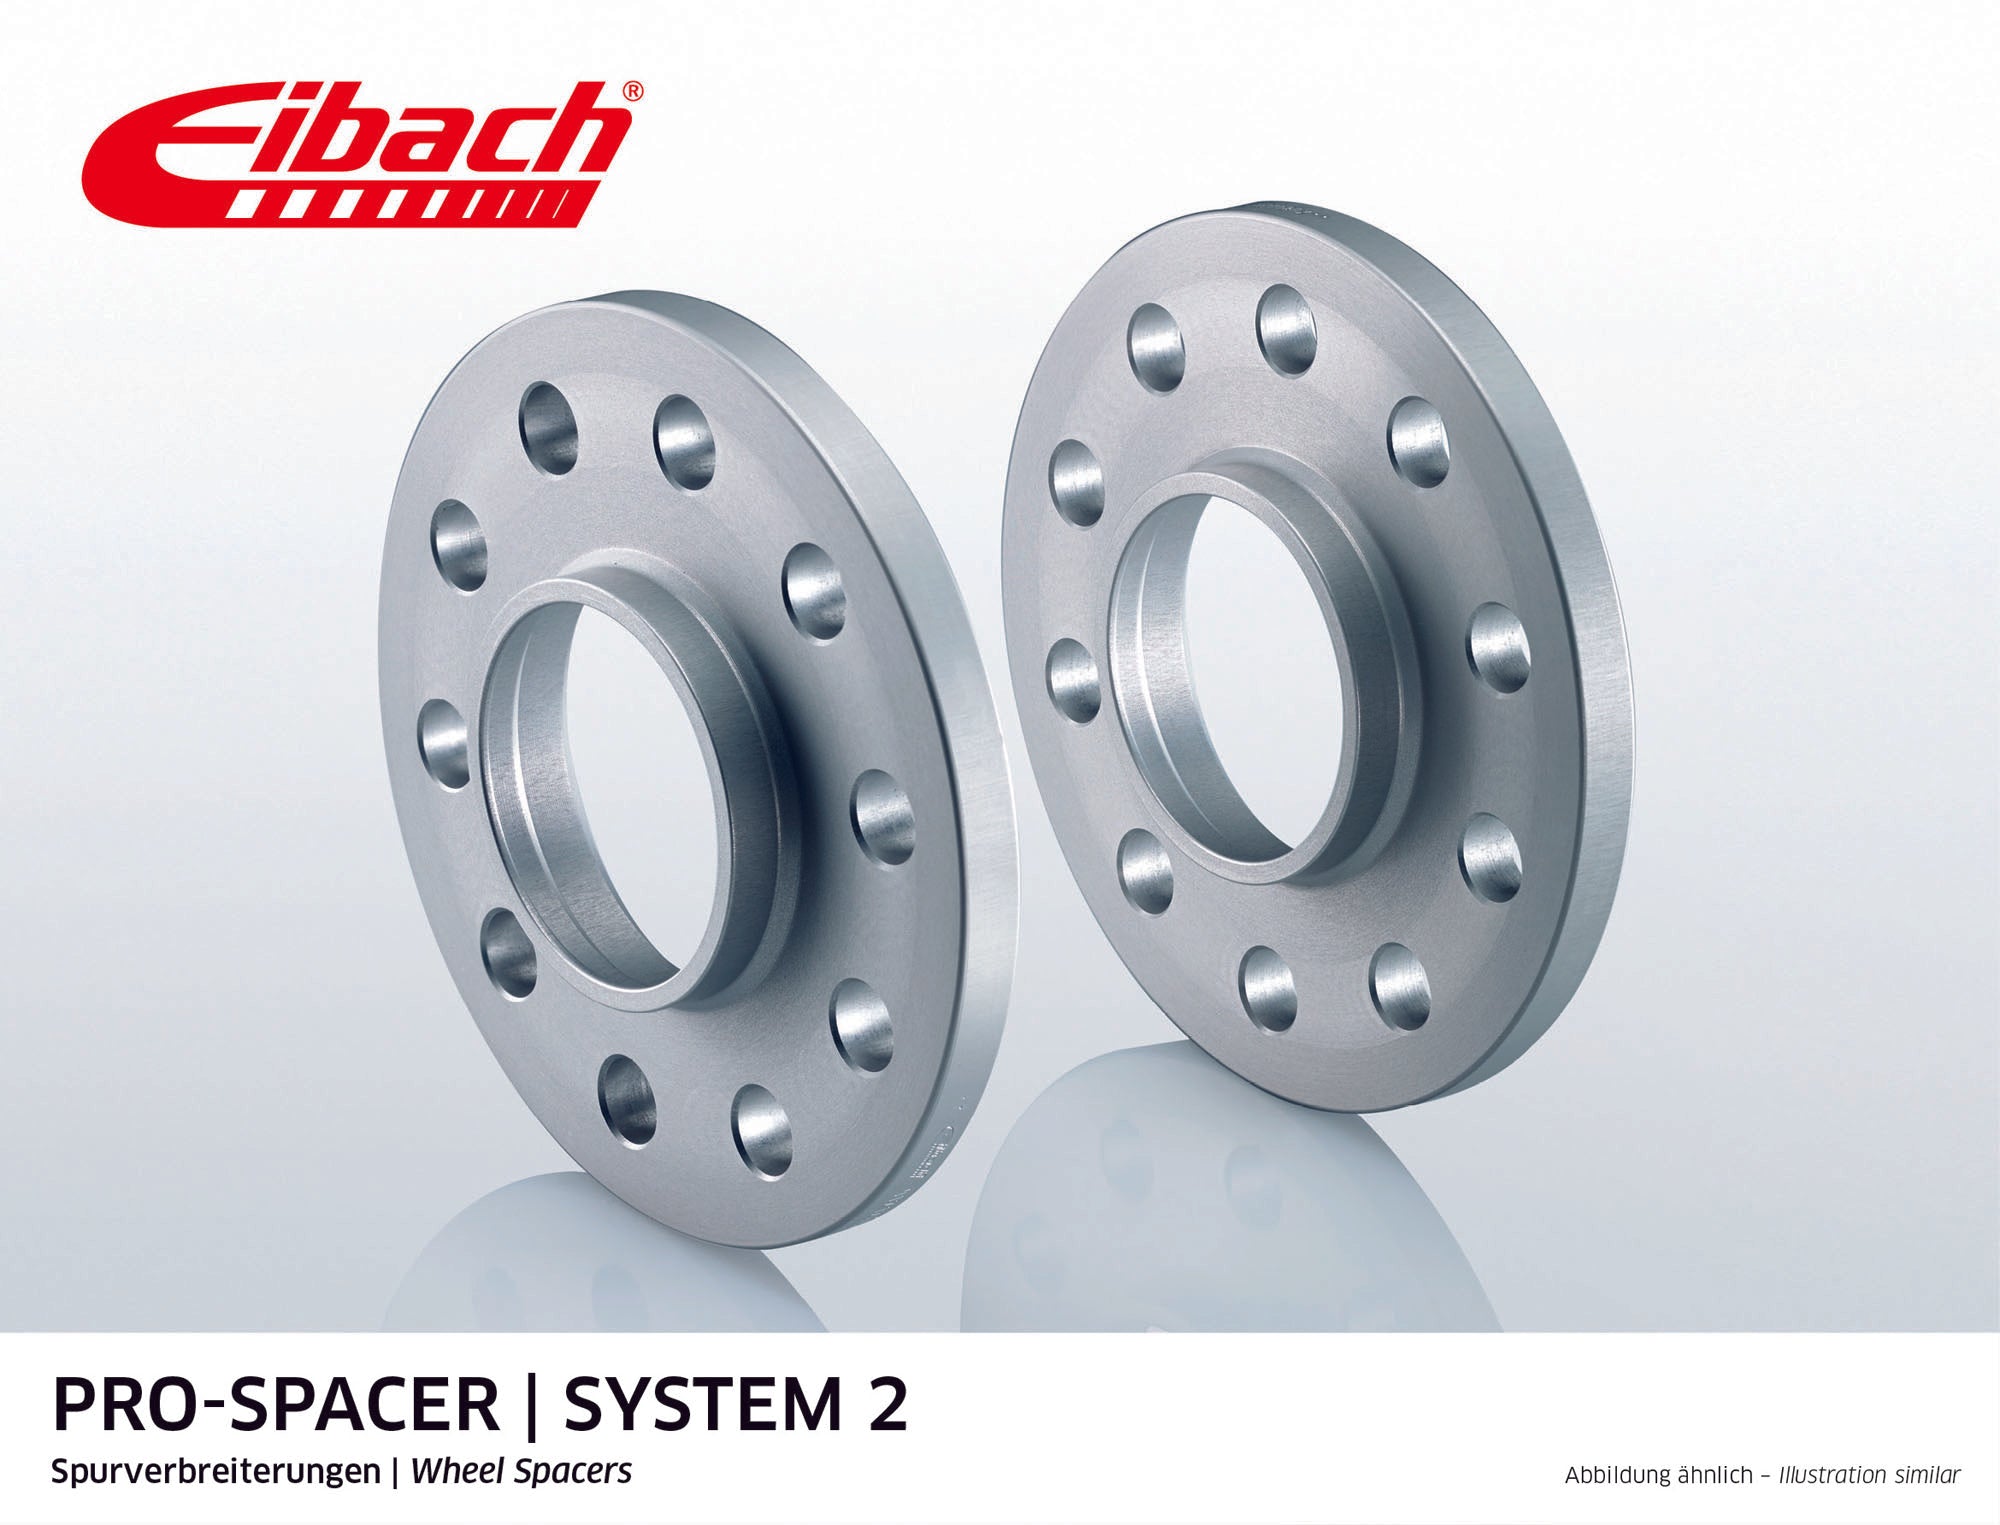 Eibach 15mm Pro-Spacer - Silver Anodized Wheel Spacer 911 2011-on #S90-2-15-018